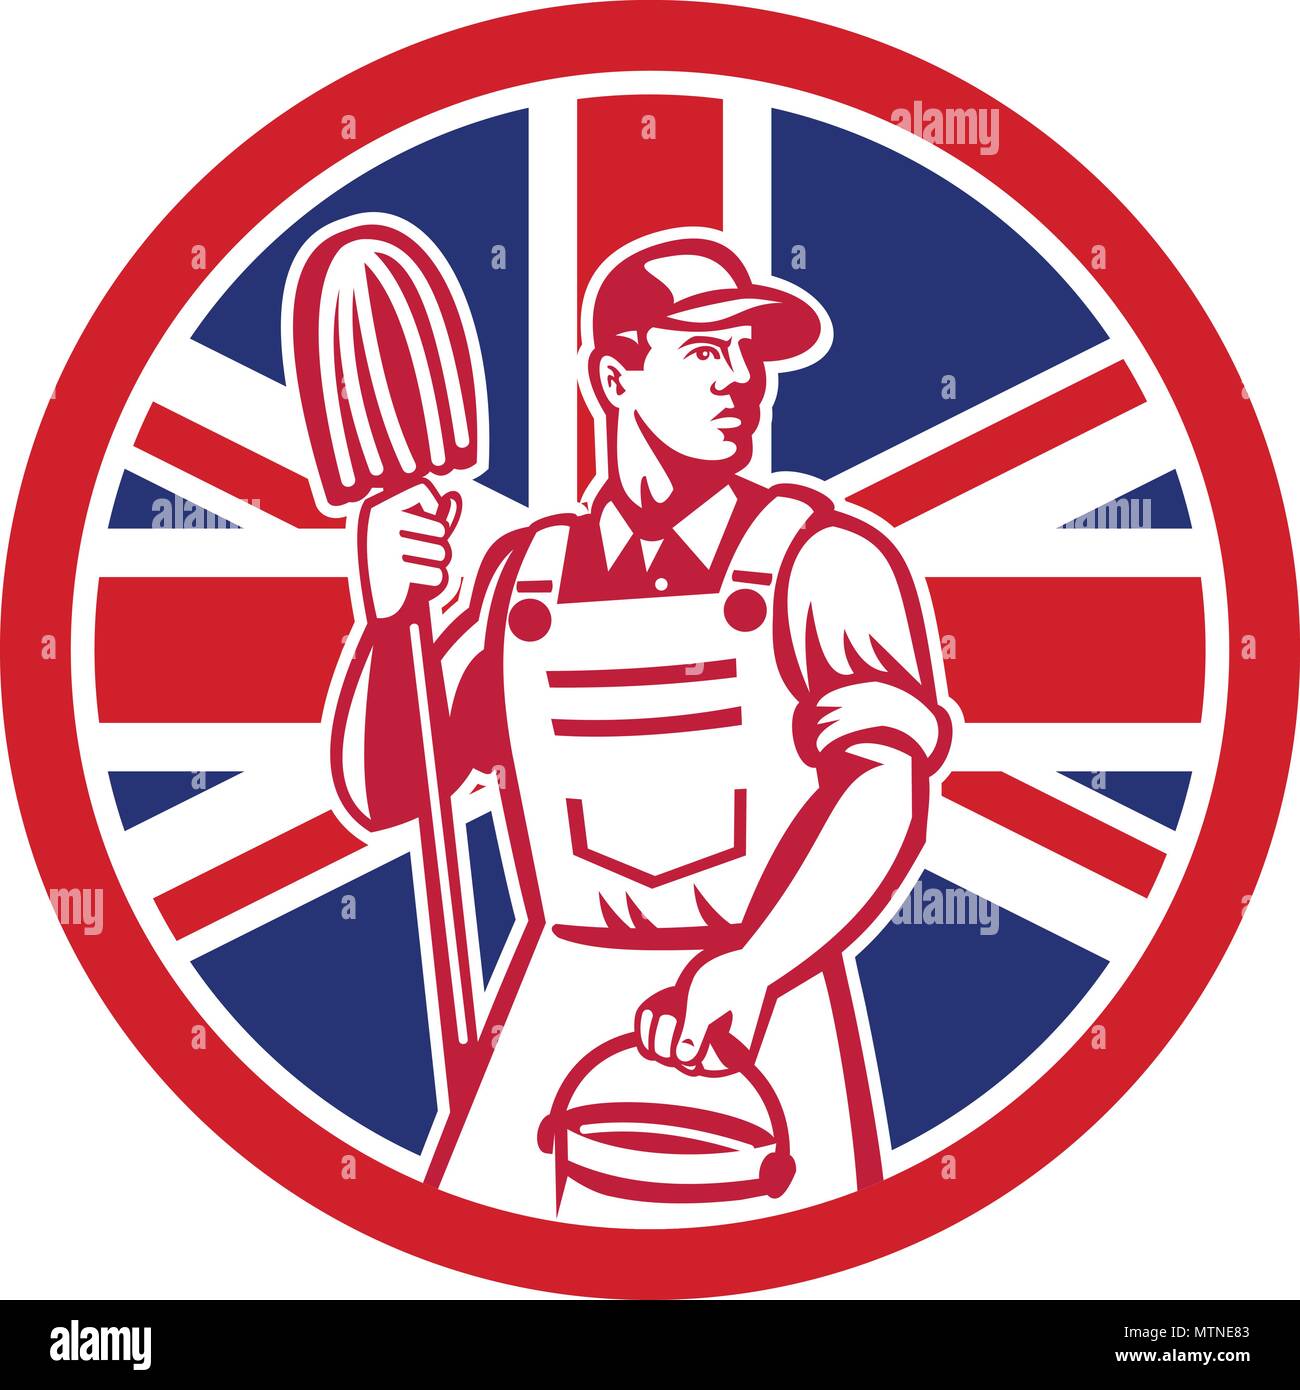 Icon retro style illustration of a British professional cleaner holding mop and bucket  with United Kingdom UK, Great Britain Union Jack flag set insi Stock Vector